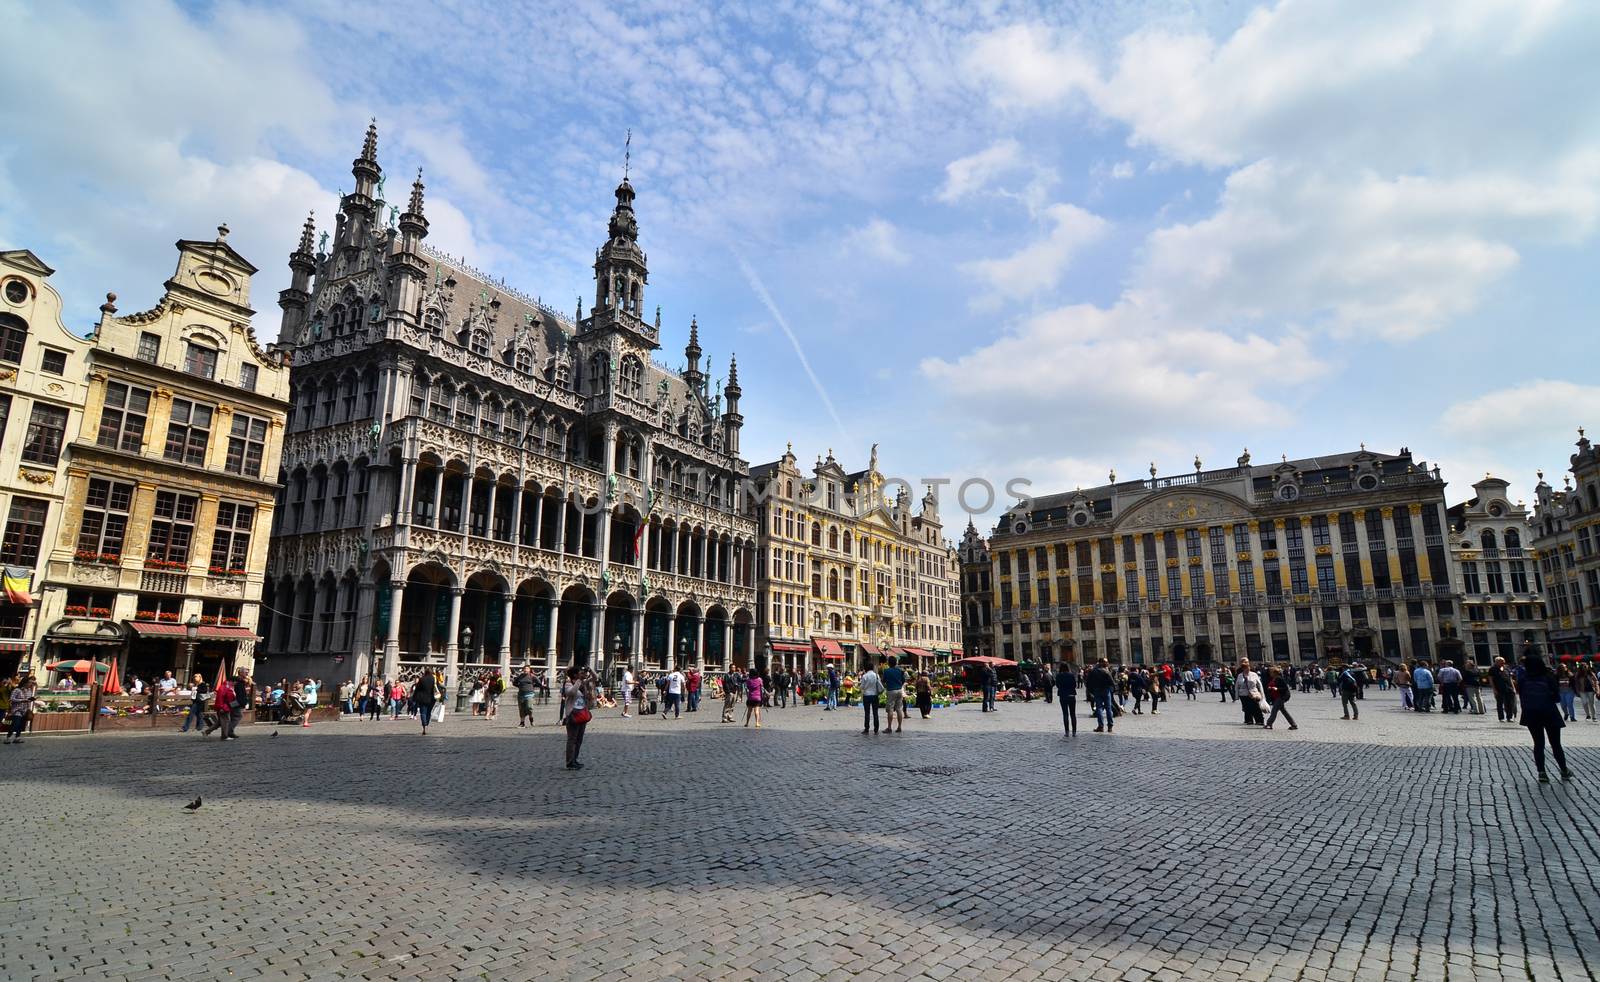 Brussels, Belgium - May 12, 2015: Tourists visiting famous Grand Place the central square of Brussels.